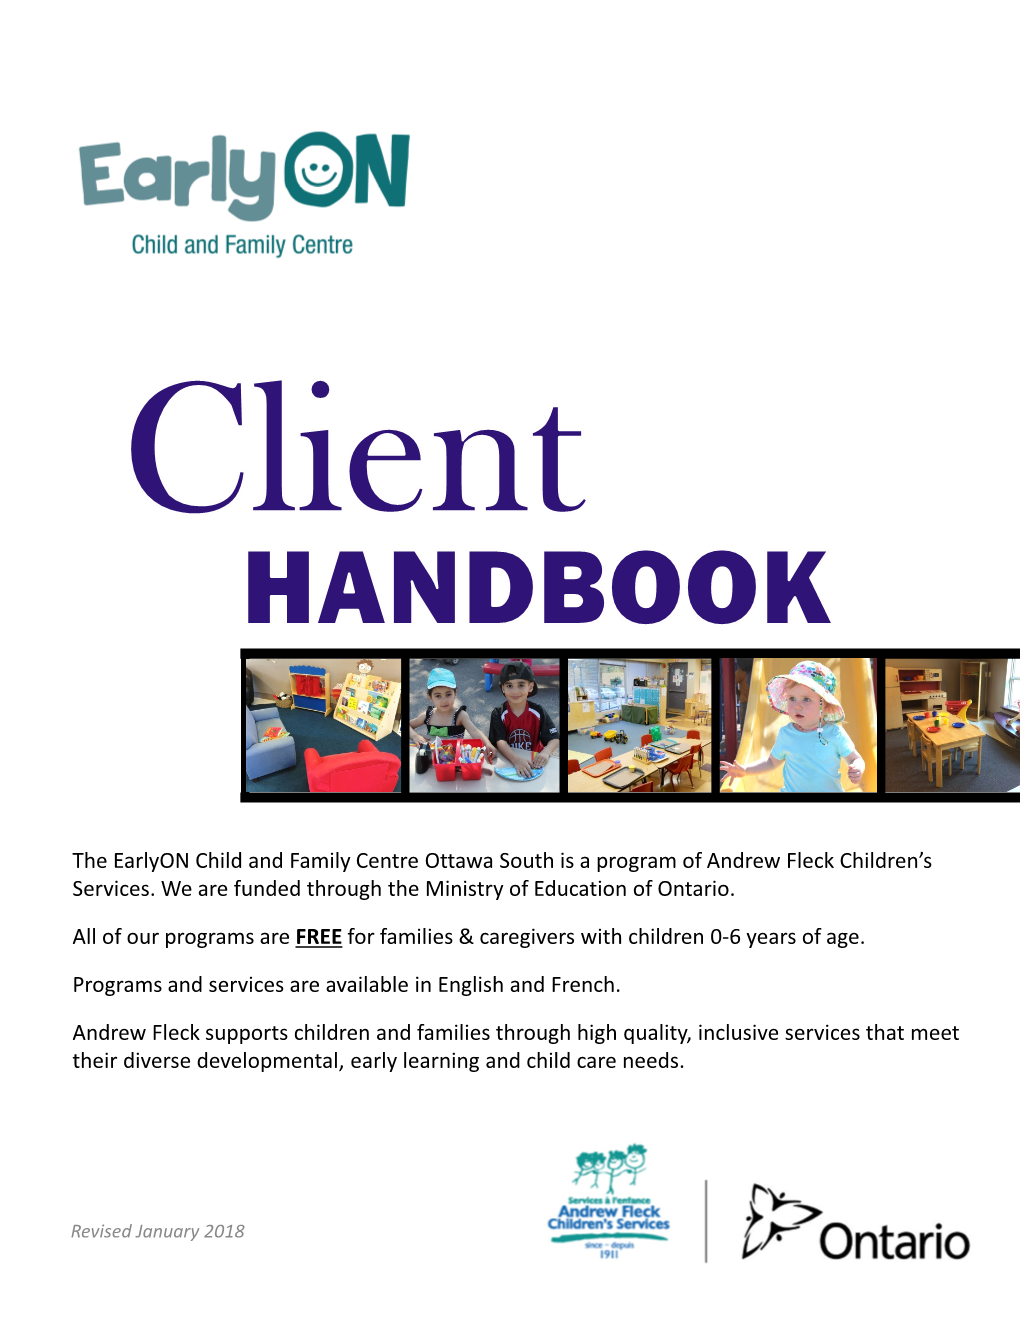 The Earlyon Child and Family Centre Ottawa South Is a Program of Andrew Fleck Children’S Services